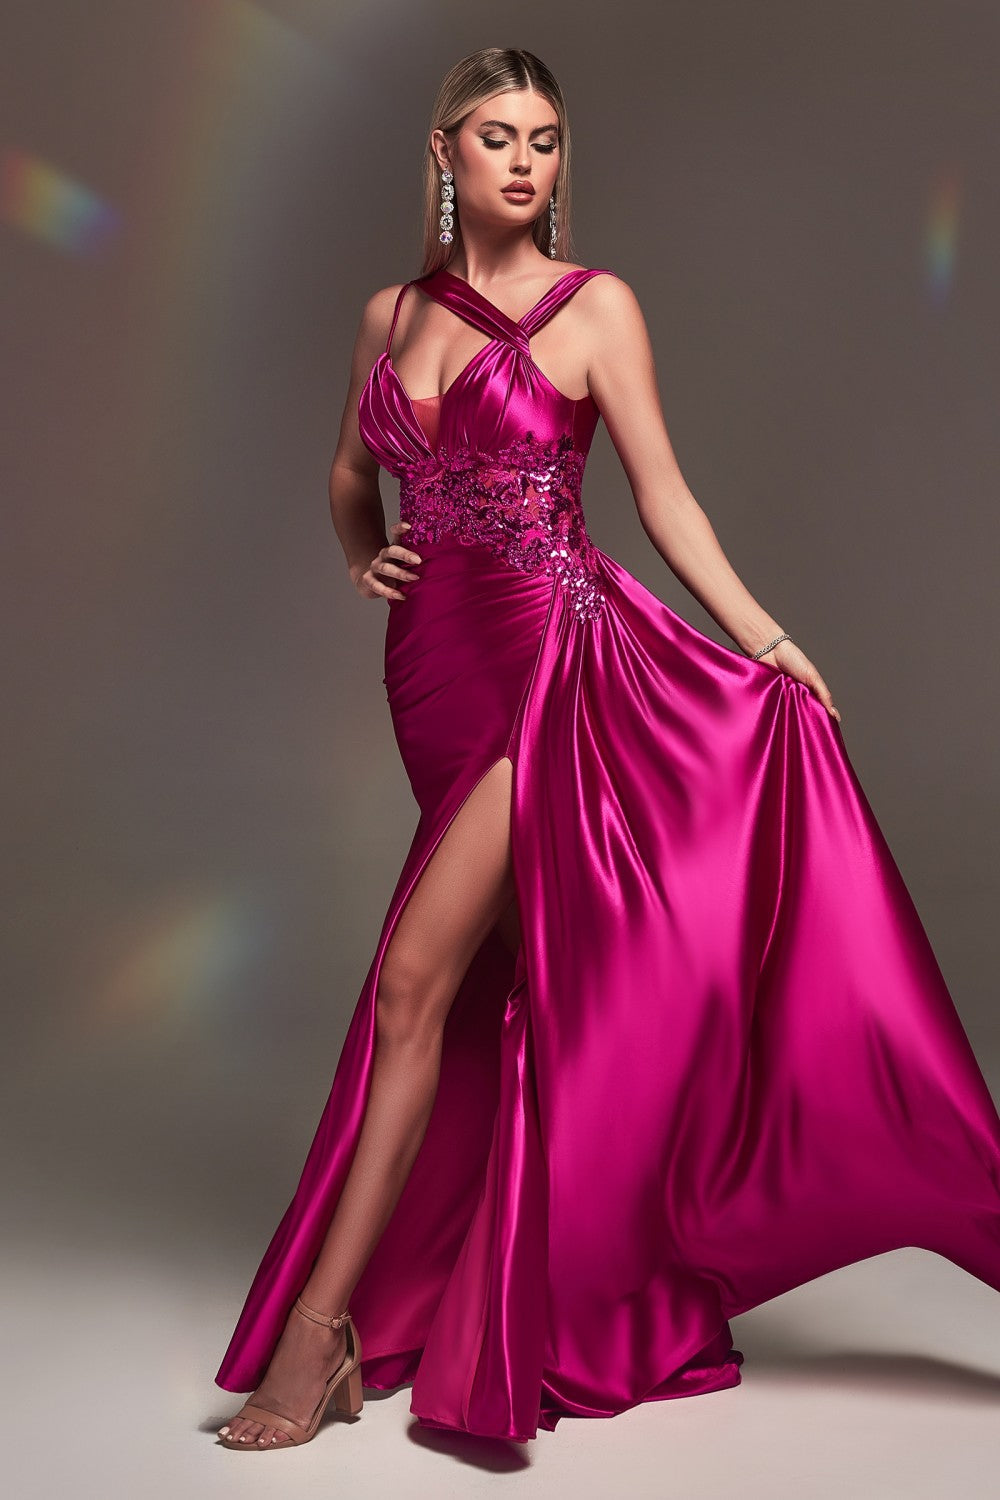 Fitted Satin Luxury Gala & Evening Prom Ball Gown Lace Detail One Shoulder Cute Sexy Formal Gown Plunging Neck Bodice CDCDS415 Elsy Style Evening Dress